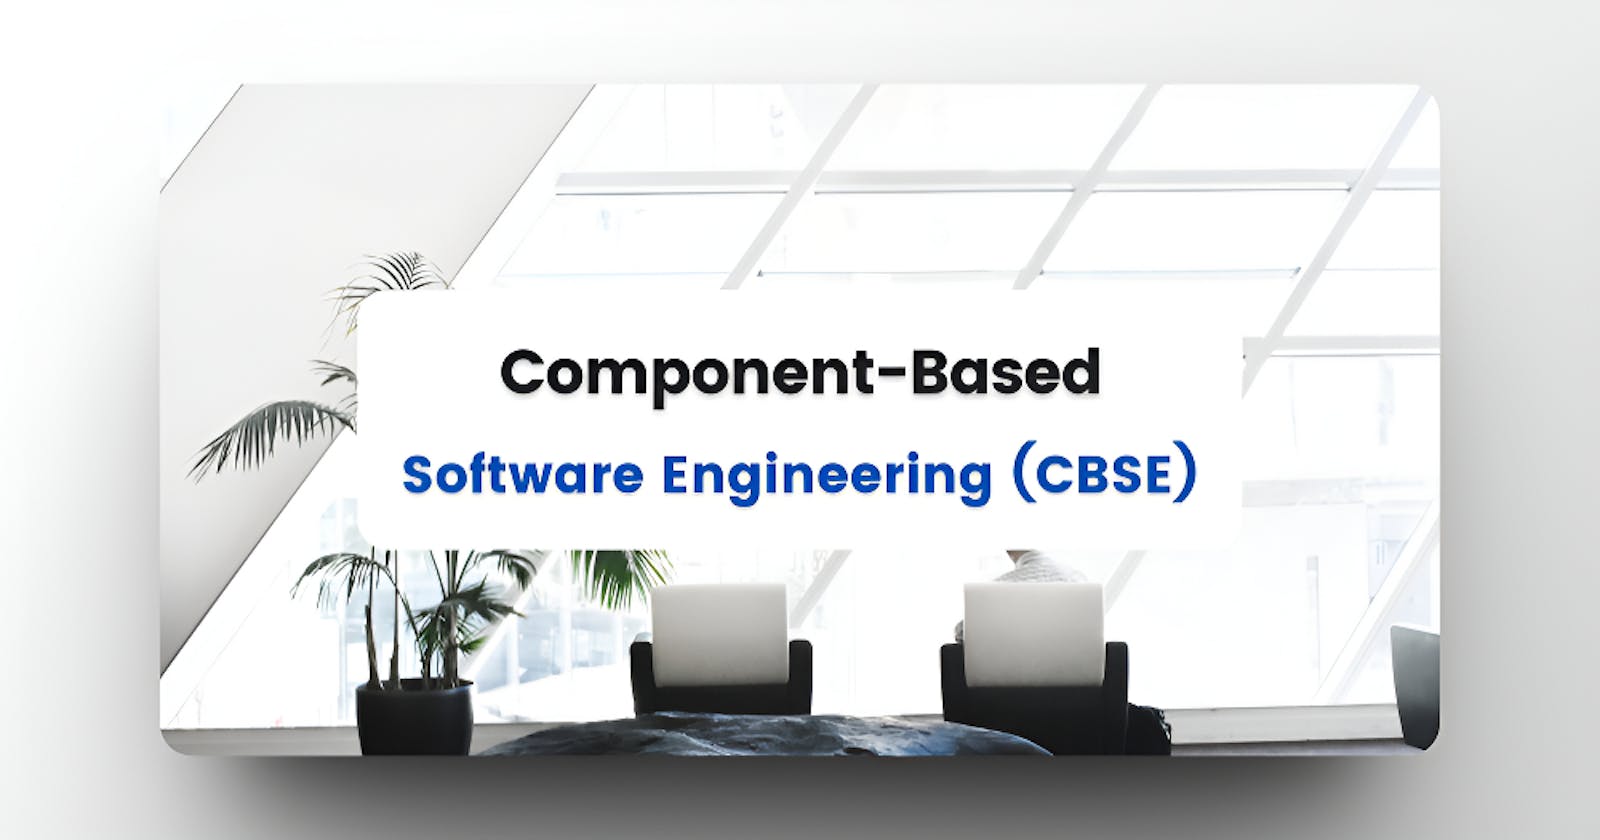 Introduction to Component-Based Software Engineering (CBSE)